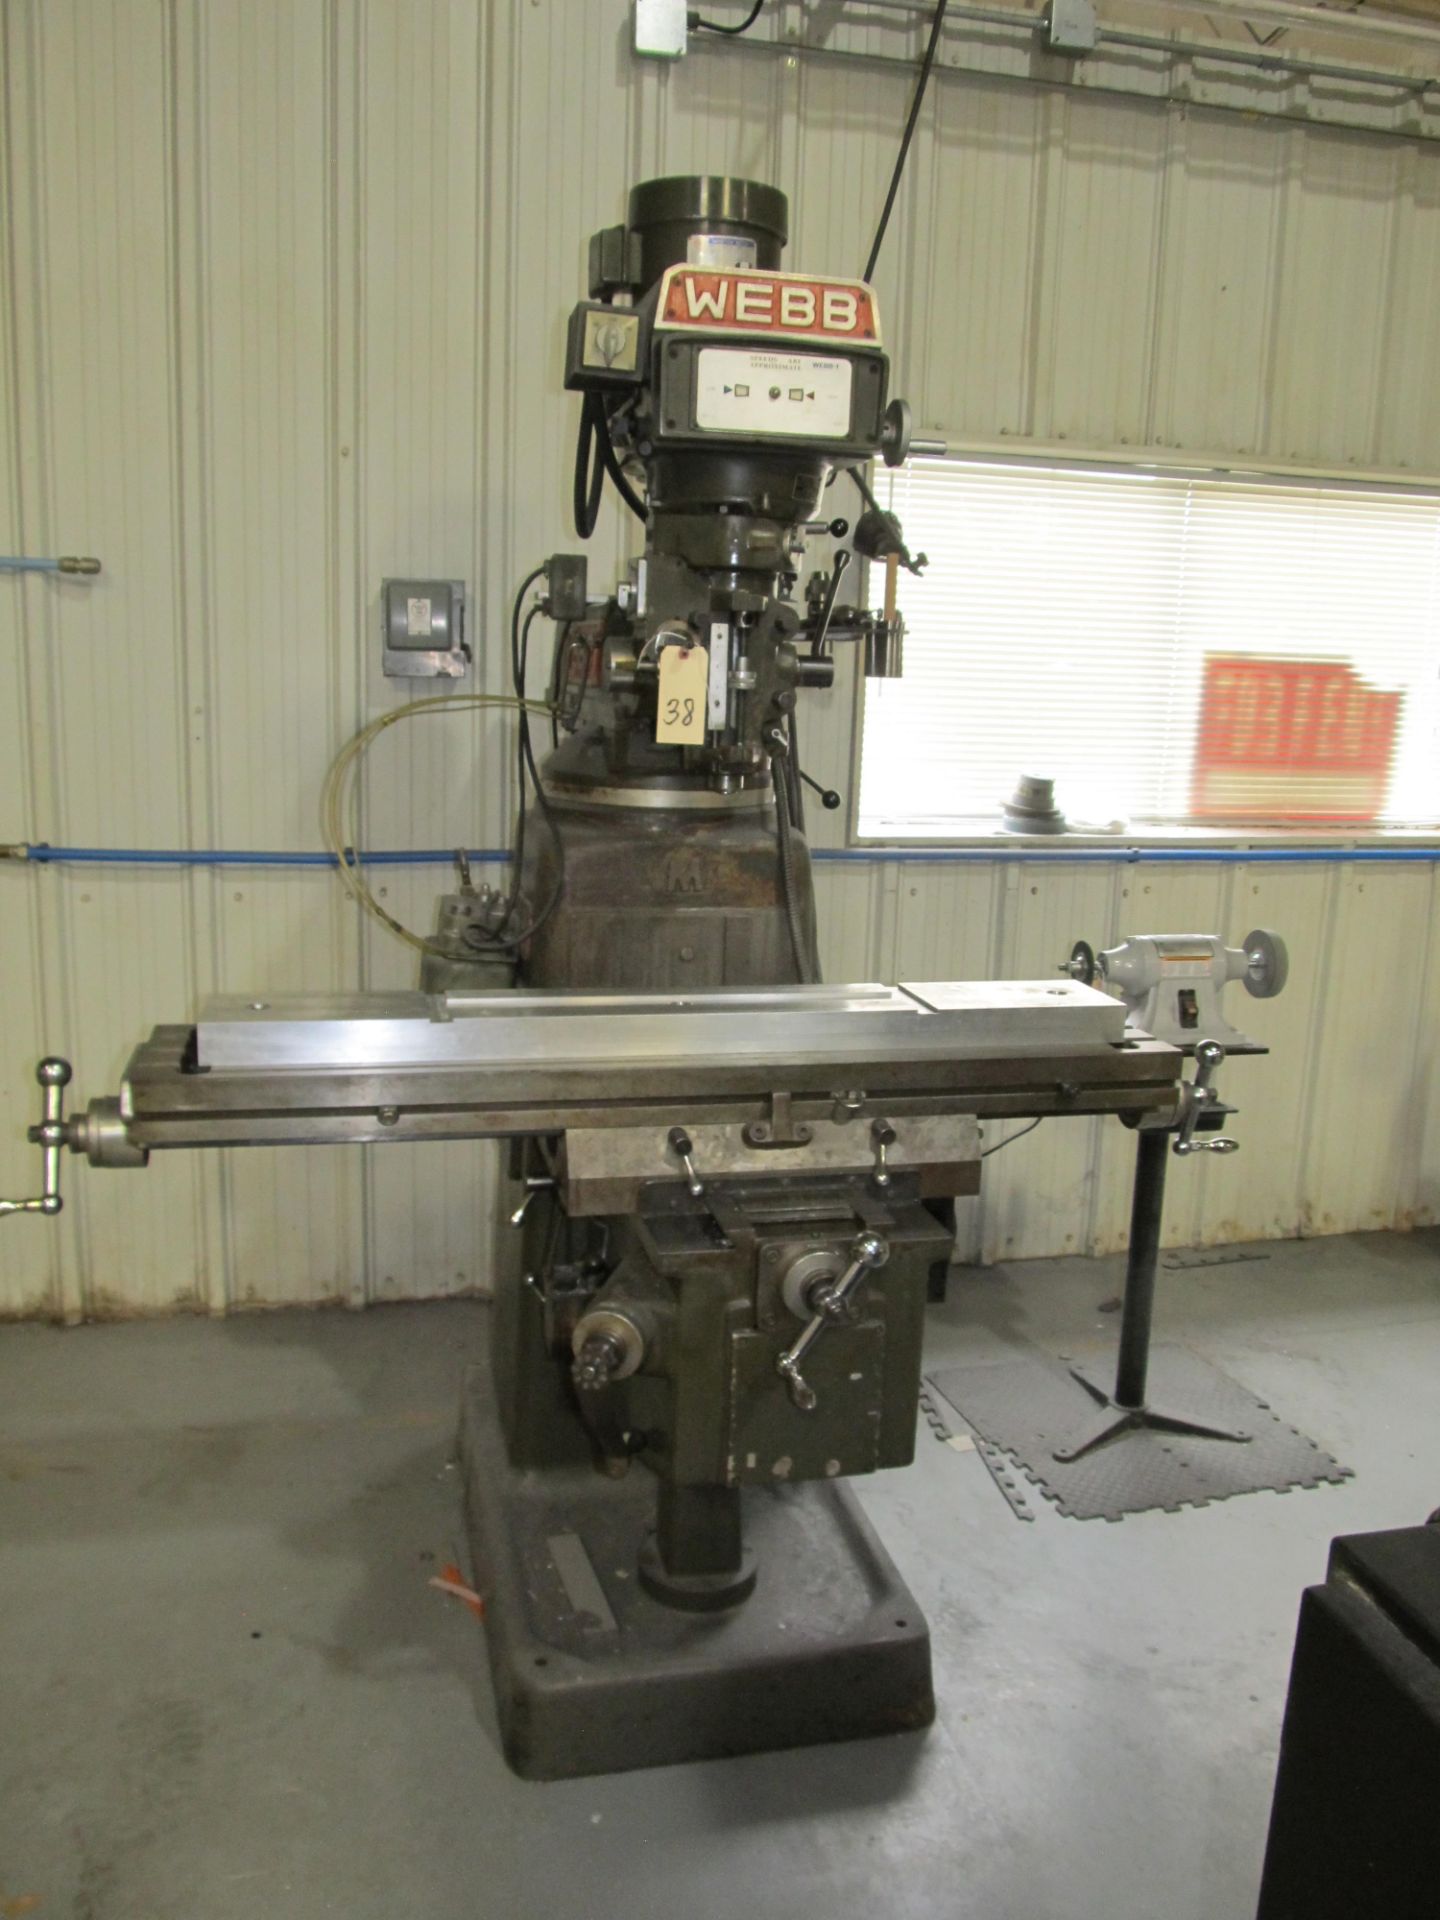 Webb/Champ Mdl.3VK 3-Axis Milling Machine w/ Knee Type 10" x 50" Table - Image 3 of 8